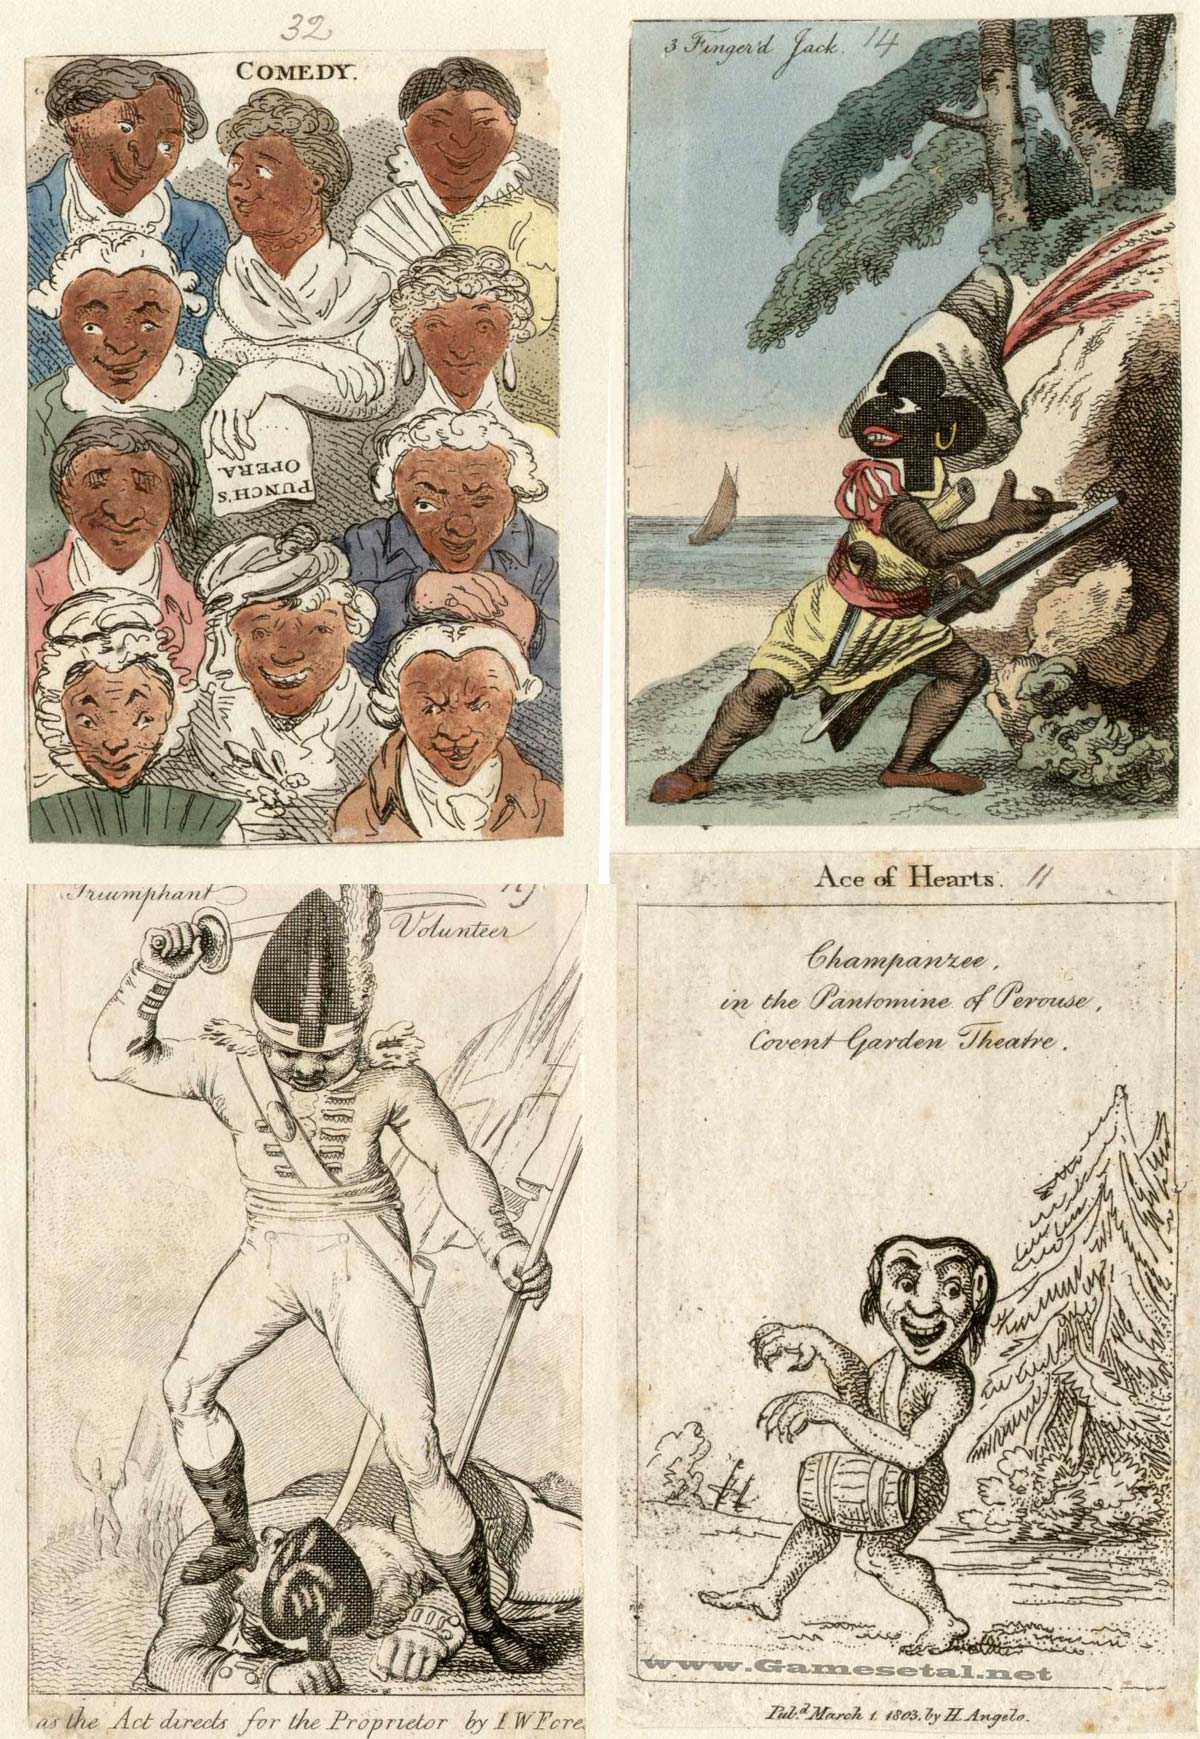 Transformation proofs from the John Nixon Scrapbook covering packs published from 1803 to 1820